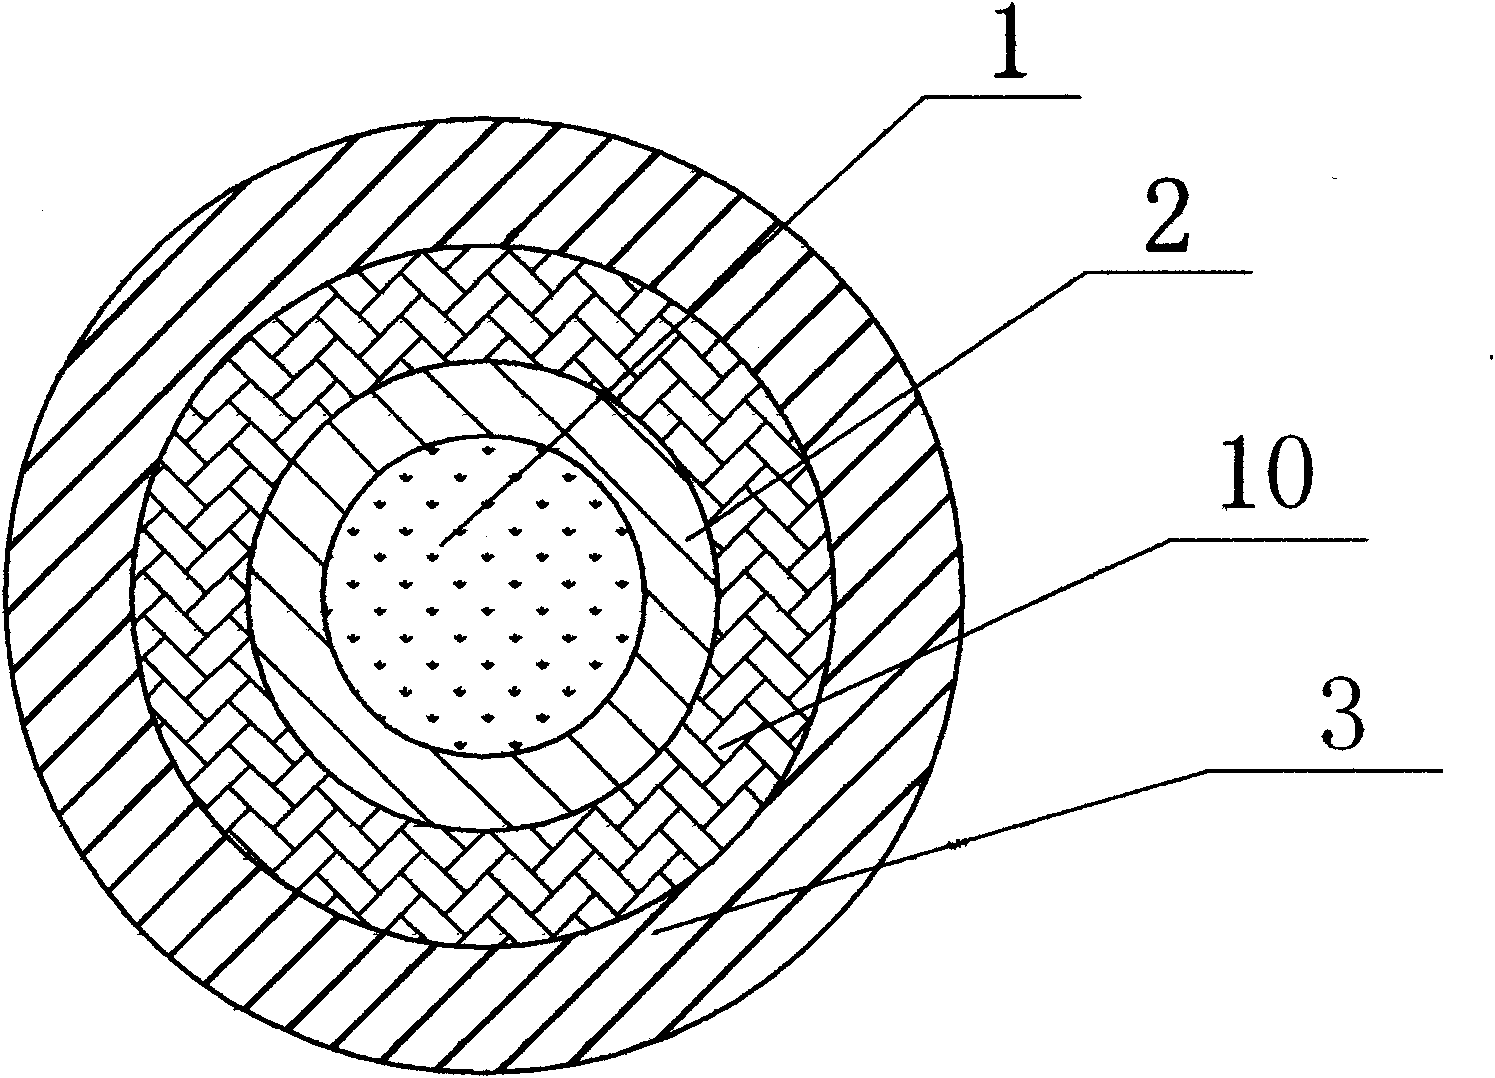 Pressure-sensitive optical cable with armor layer